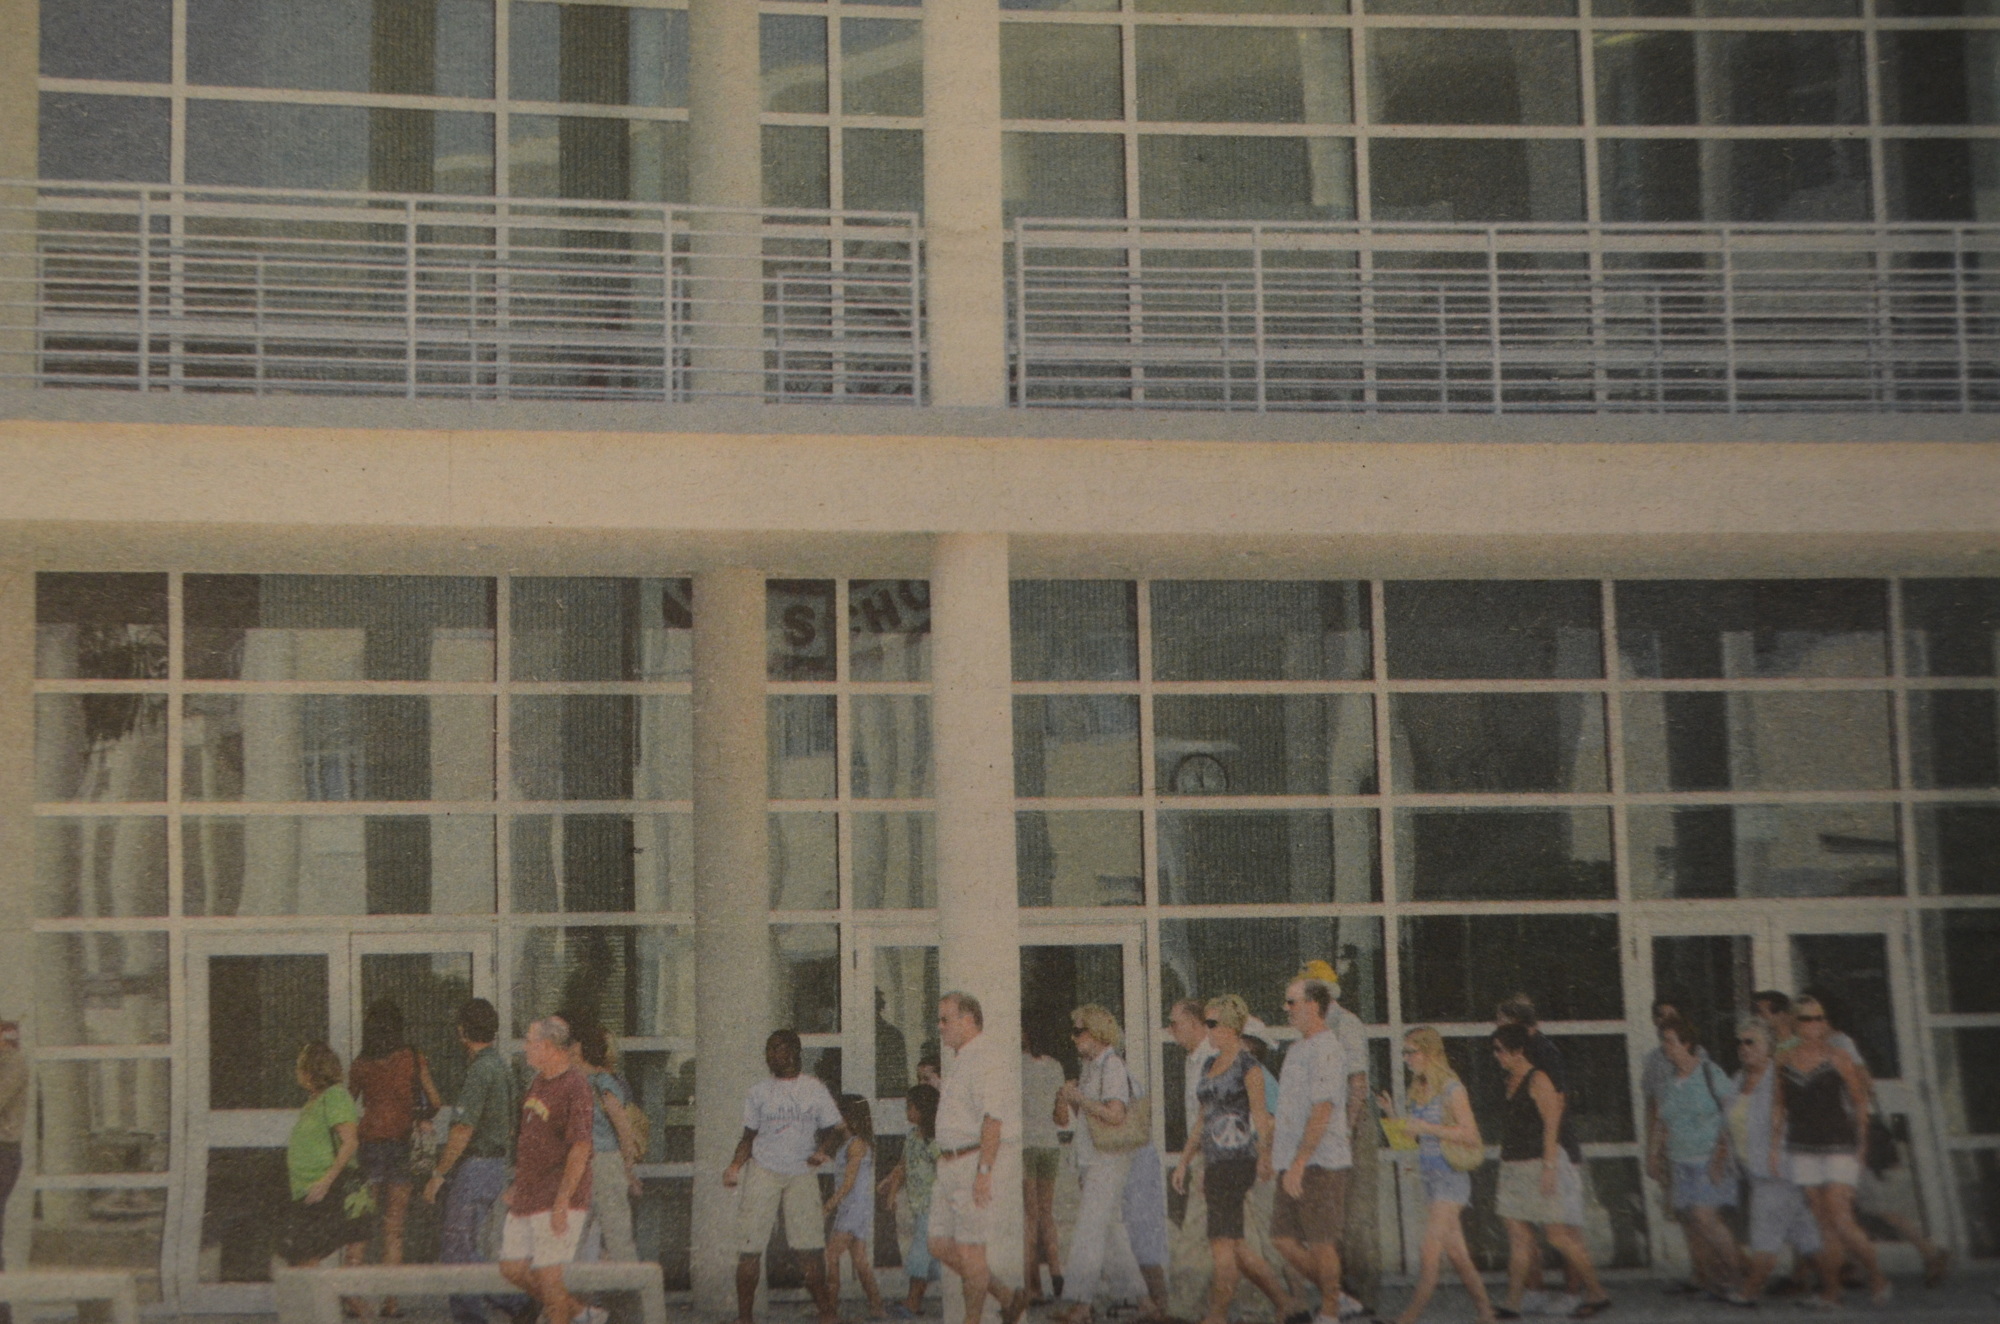 People line up to enter the newly constructed Riverview High School in 2009.